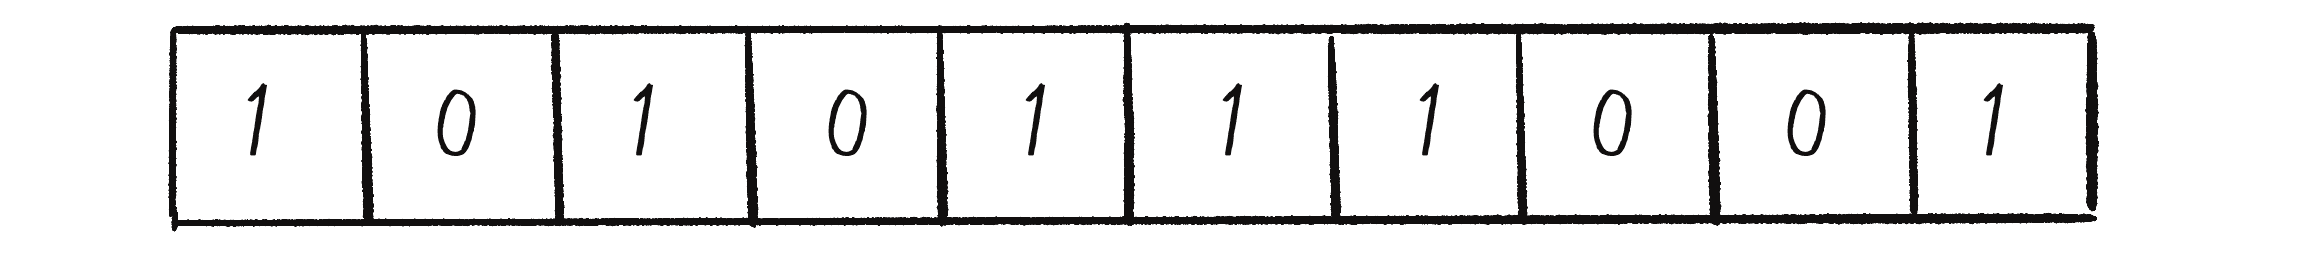 Figure 7.3: A 1D line of cells marked with state 0 or 1. What familiar programming data structure could represent this sequence?